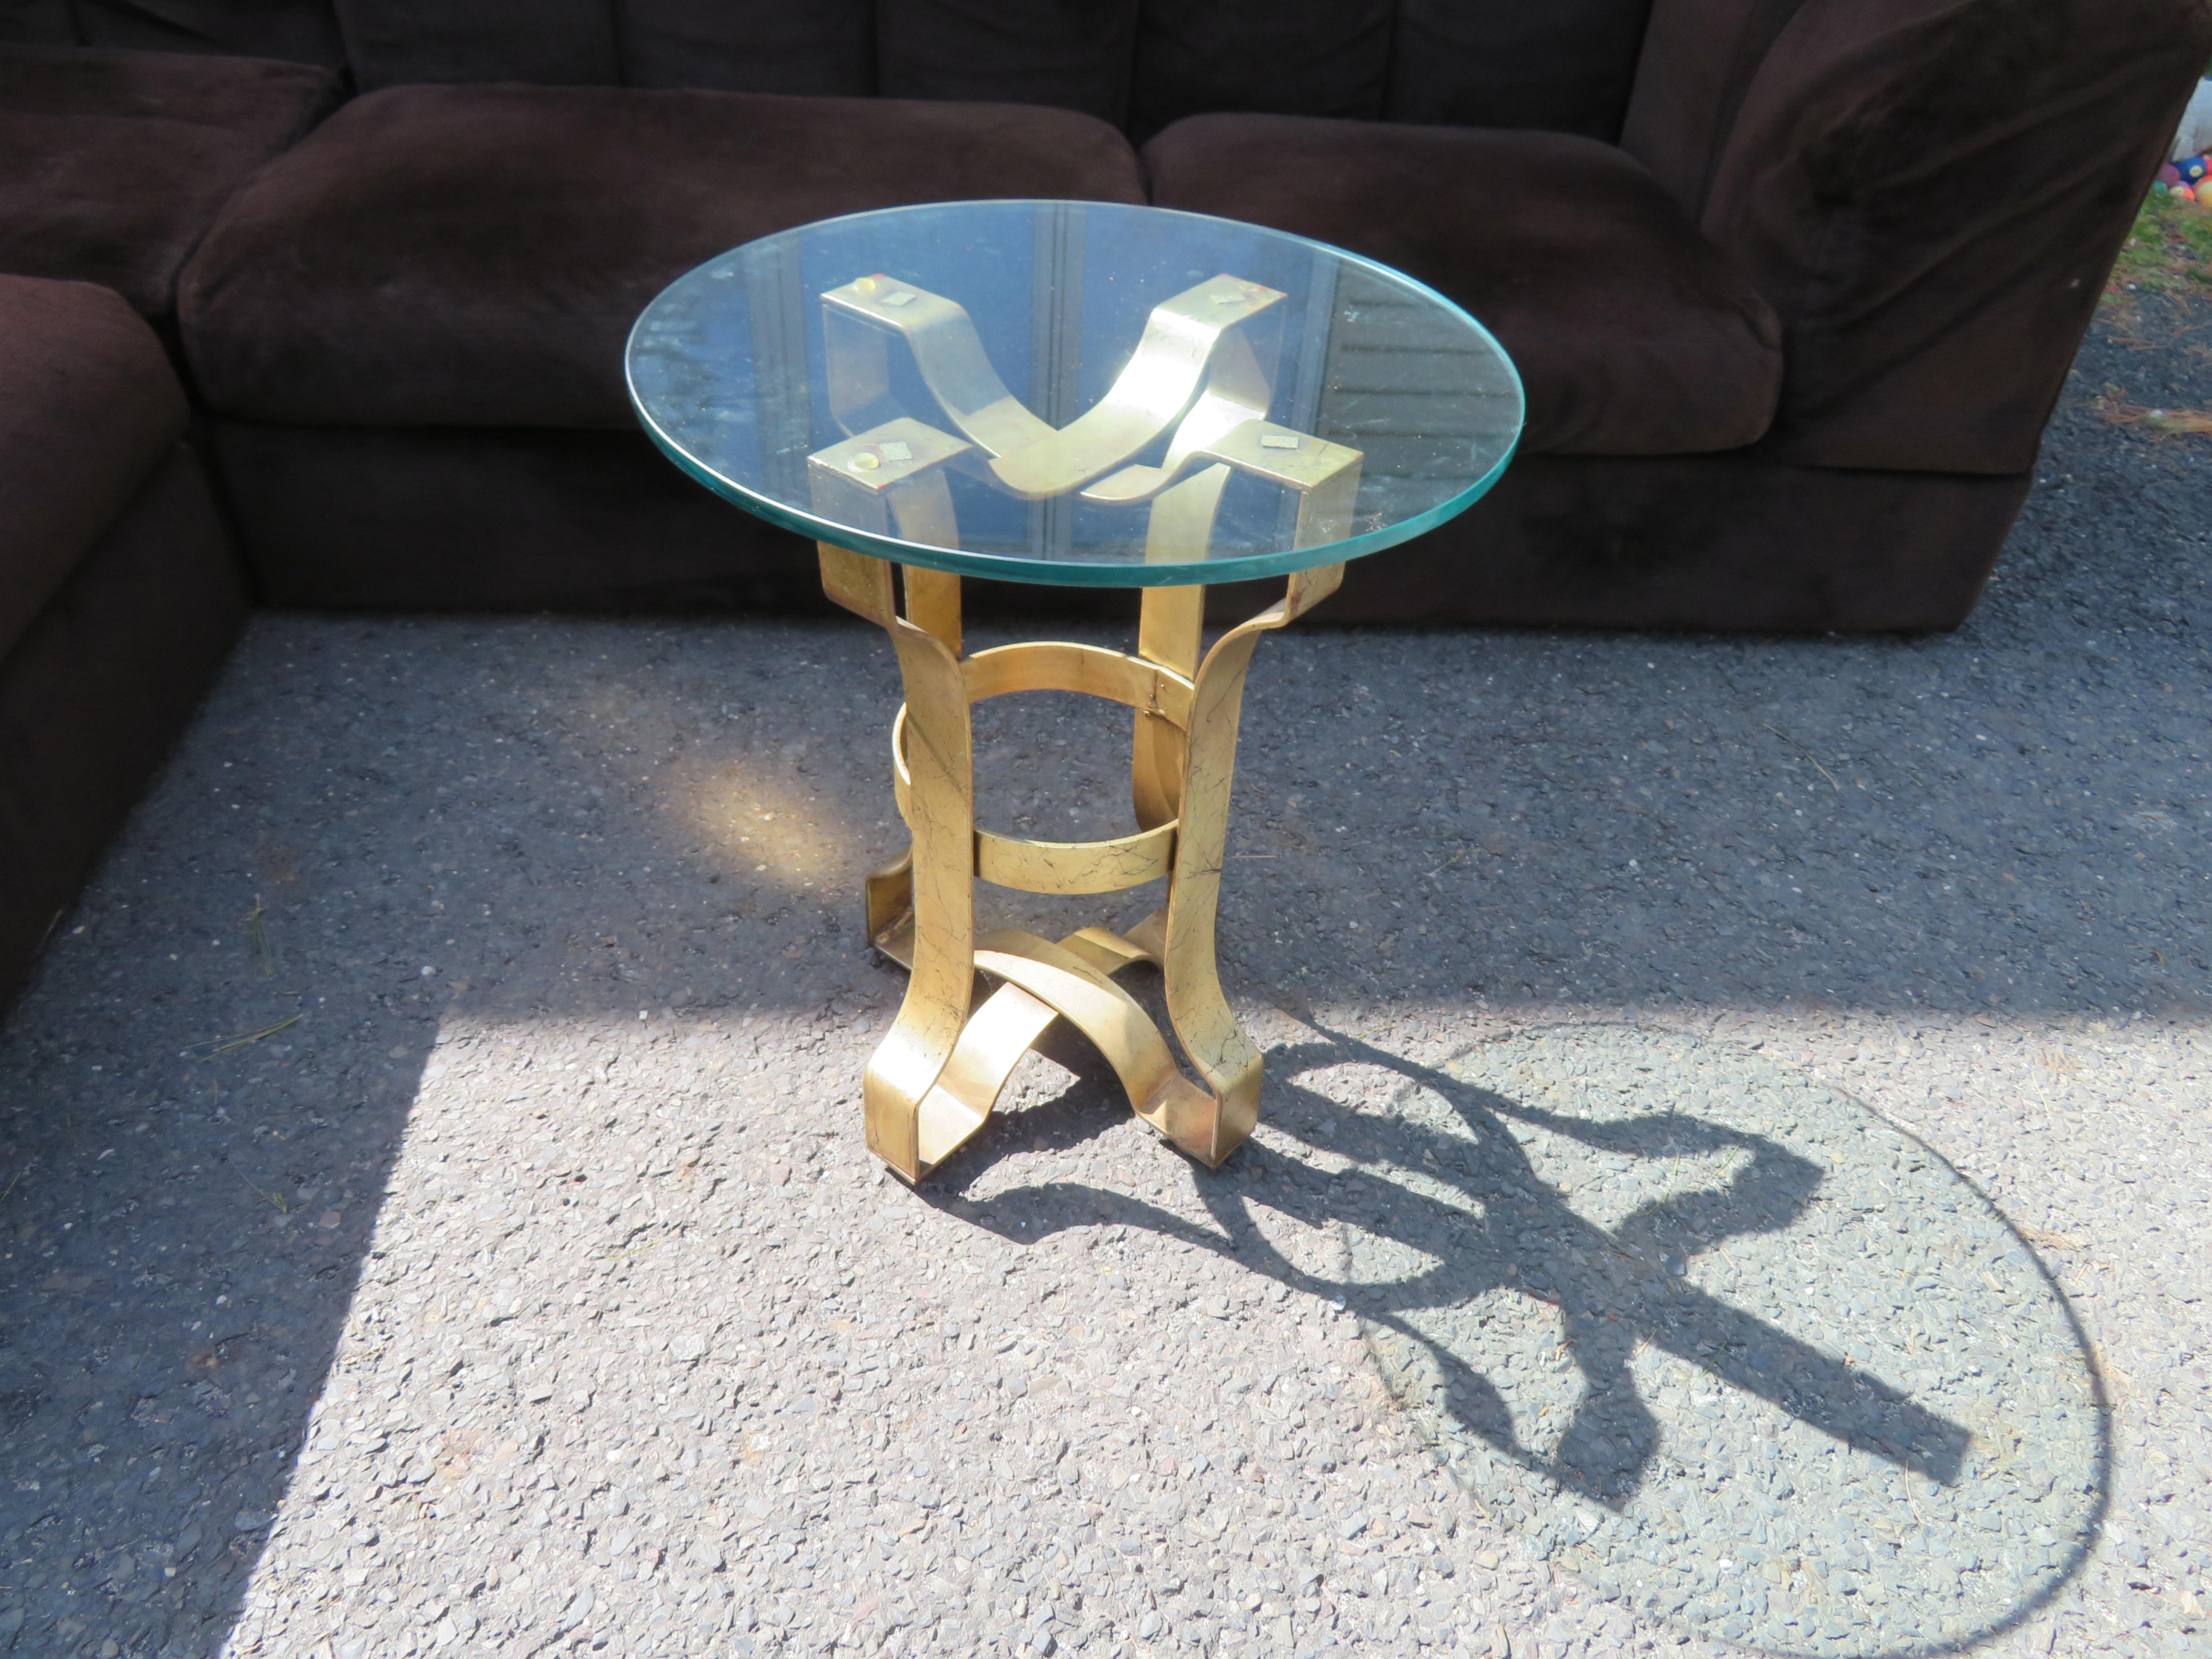 Stunning Hollywood Regency gilt gold iron scroll side table. This table measures 22.5